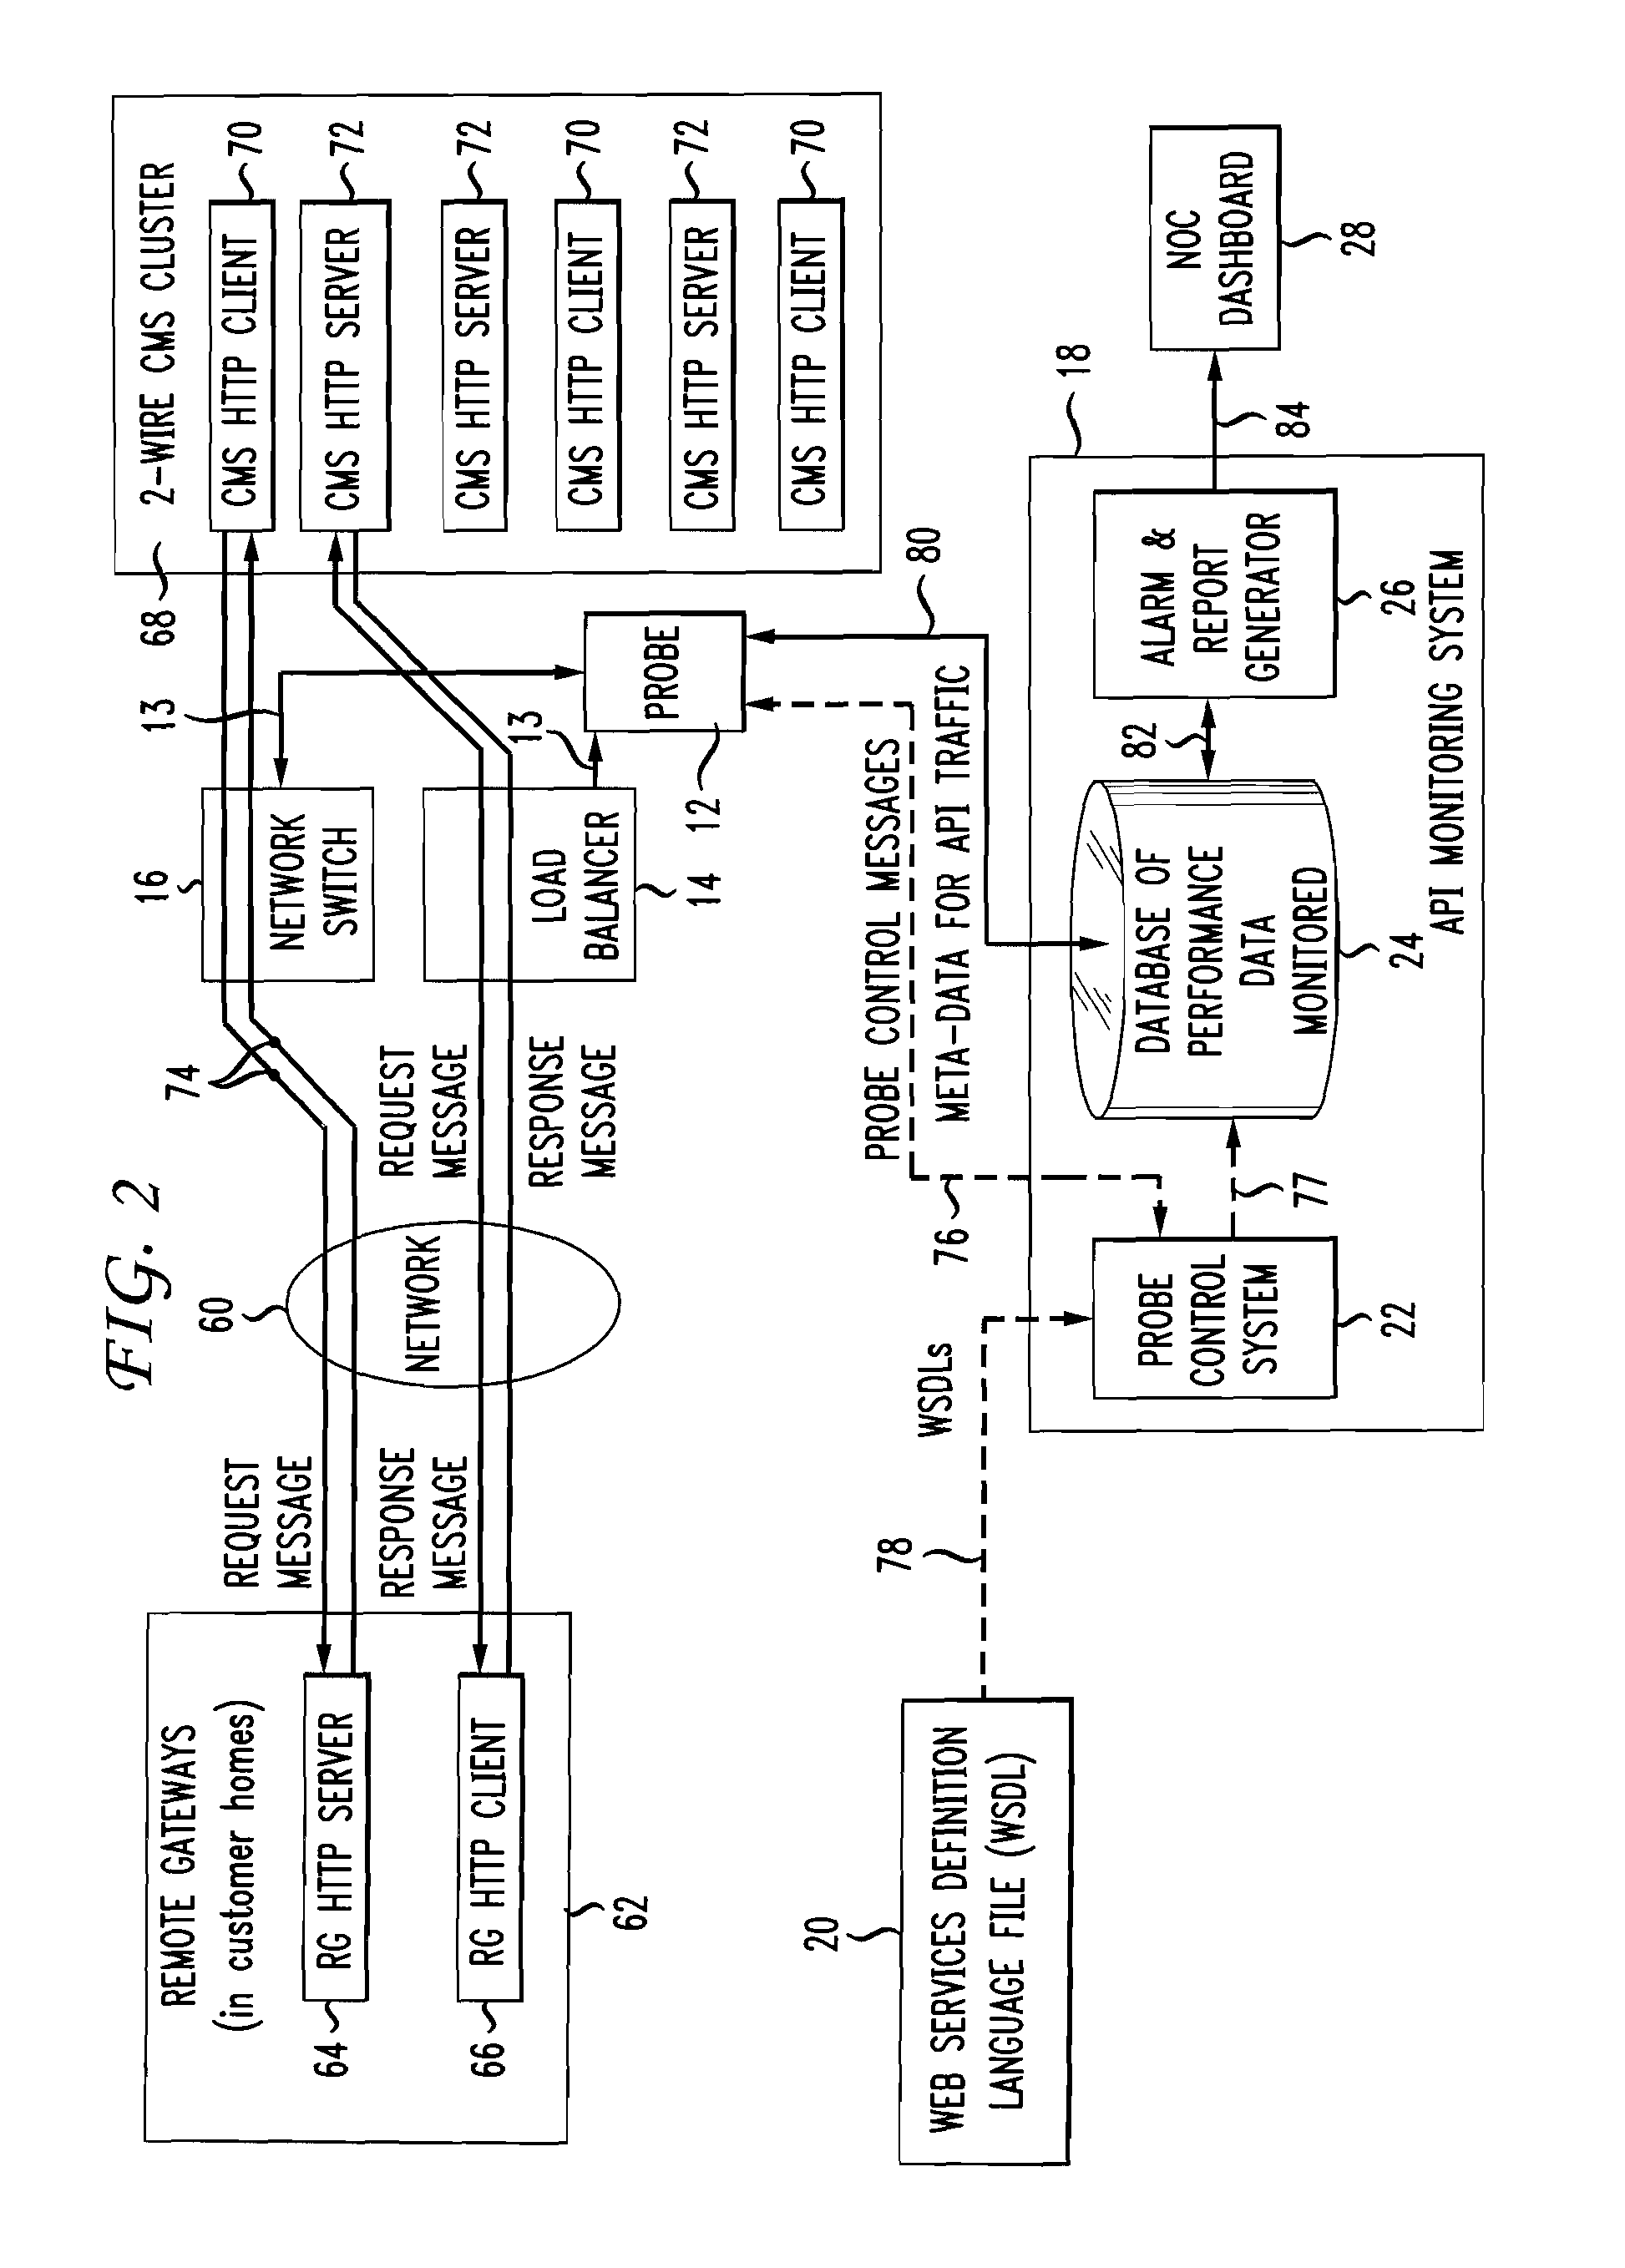 Method and apparatus for measuring the end-to-end performance and capacity of complex network service